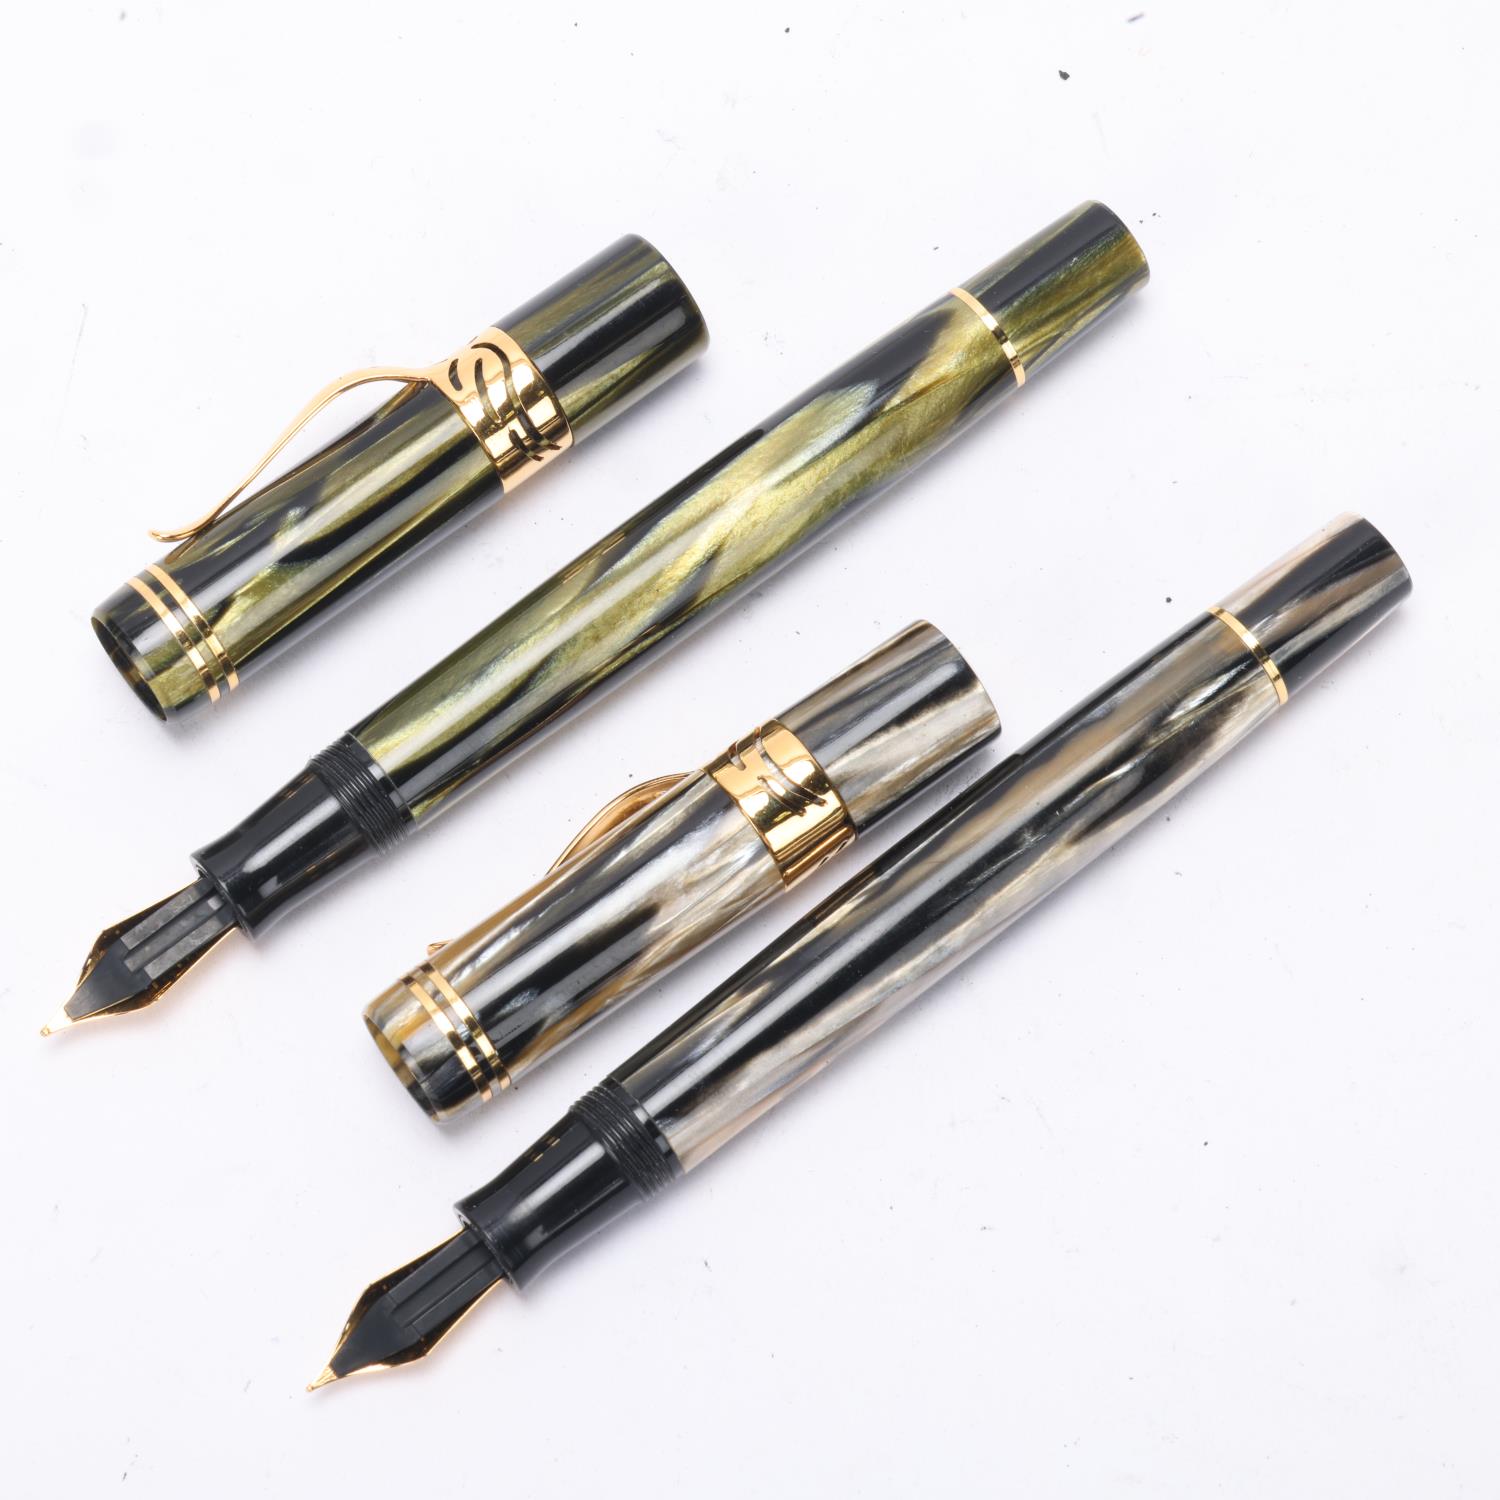 2 Visconti "Frederico II" fountain pens, piston fill with marbled body, limited edition of 800, both - Bild 3 aus 4